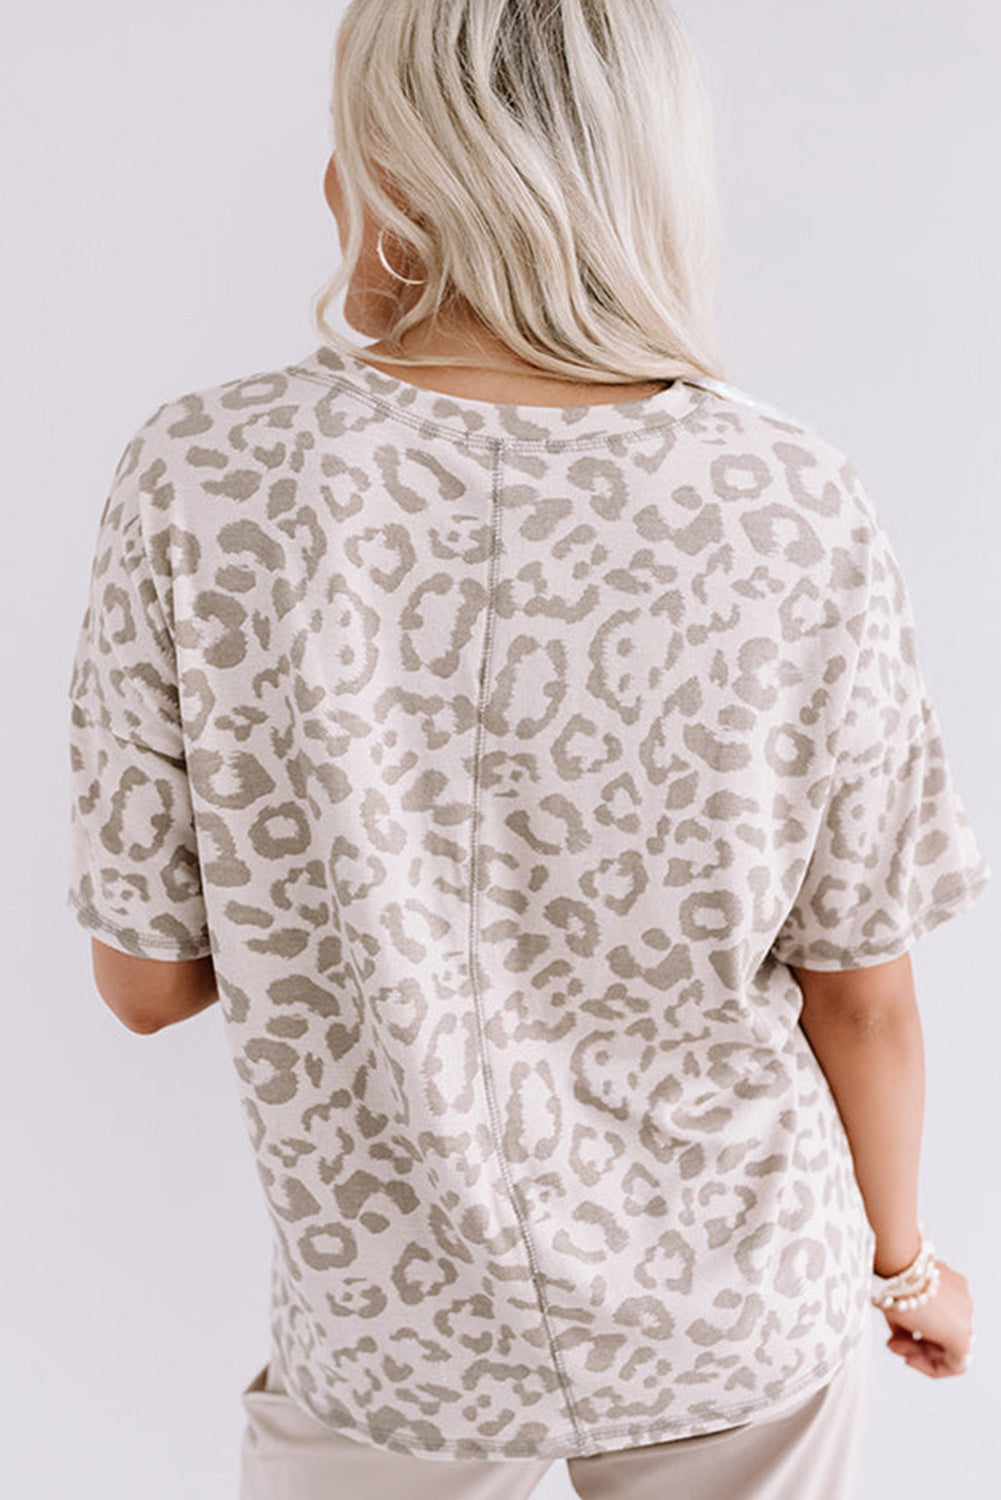 Brown Leopard Print Exposed Stitching V Neck T Shirt- Plus Size